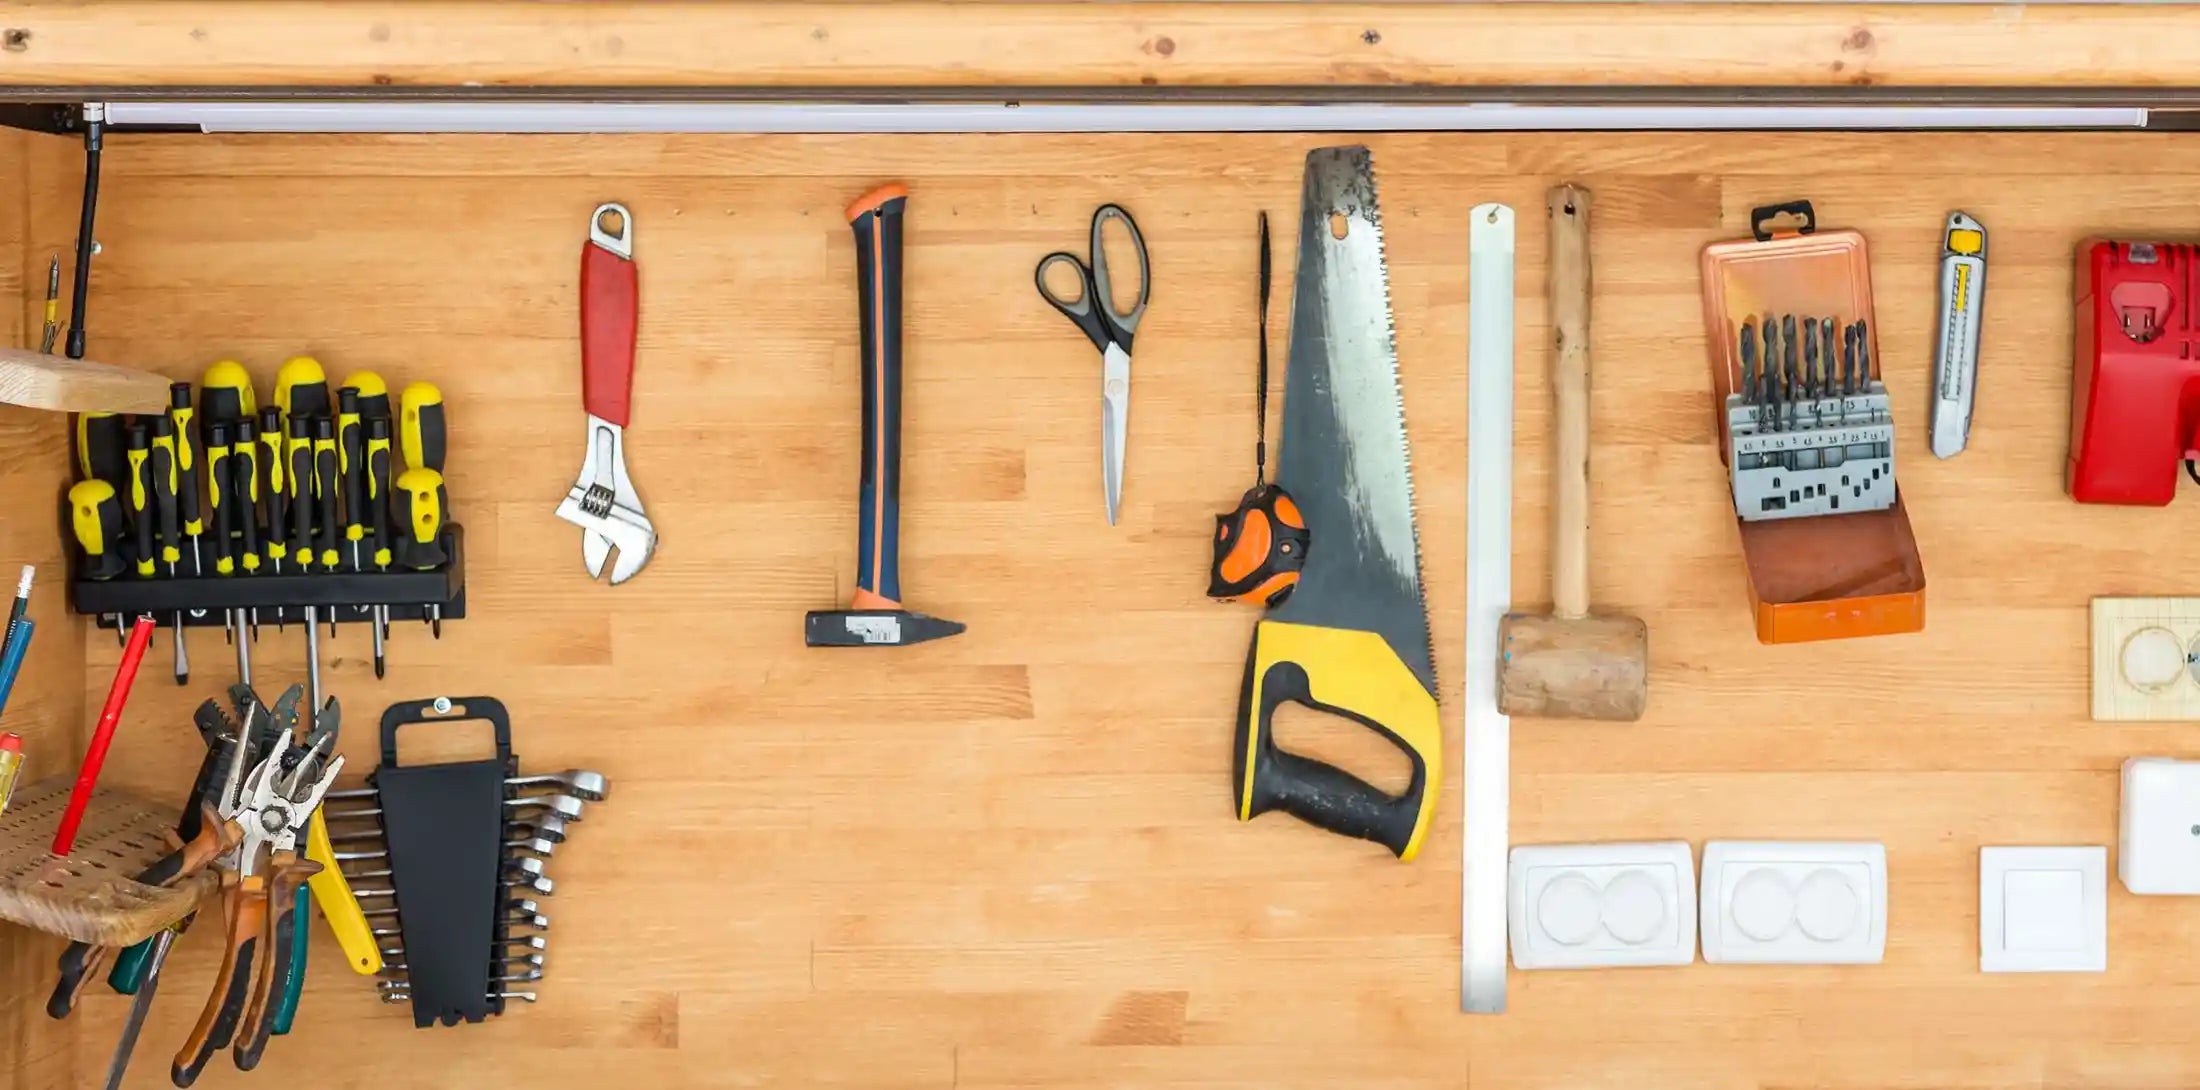 A Beginner's Guide to The Top 5 Hand Tools Every DIYer Needs To Know About